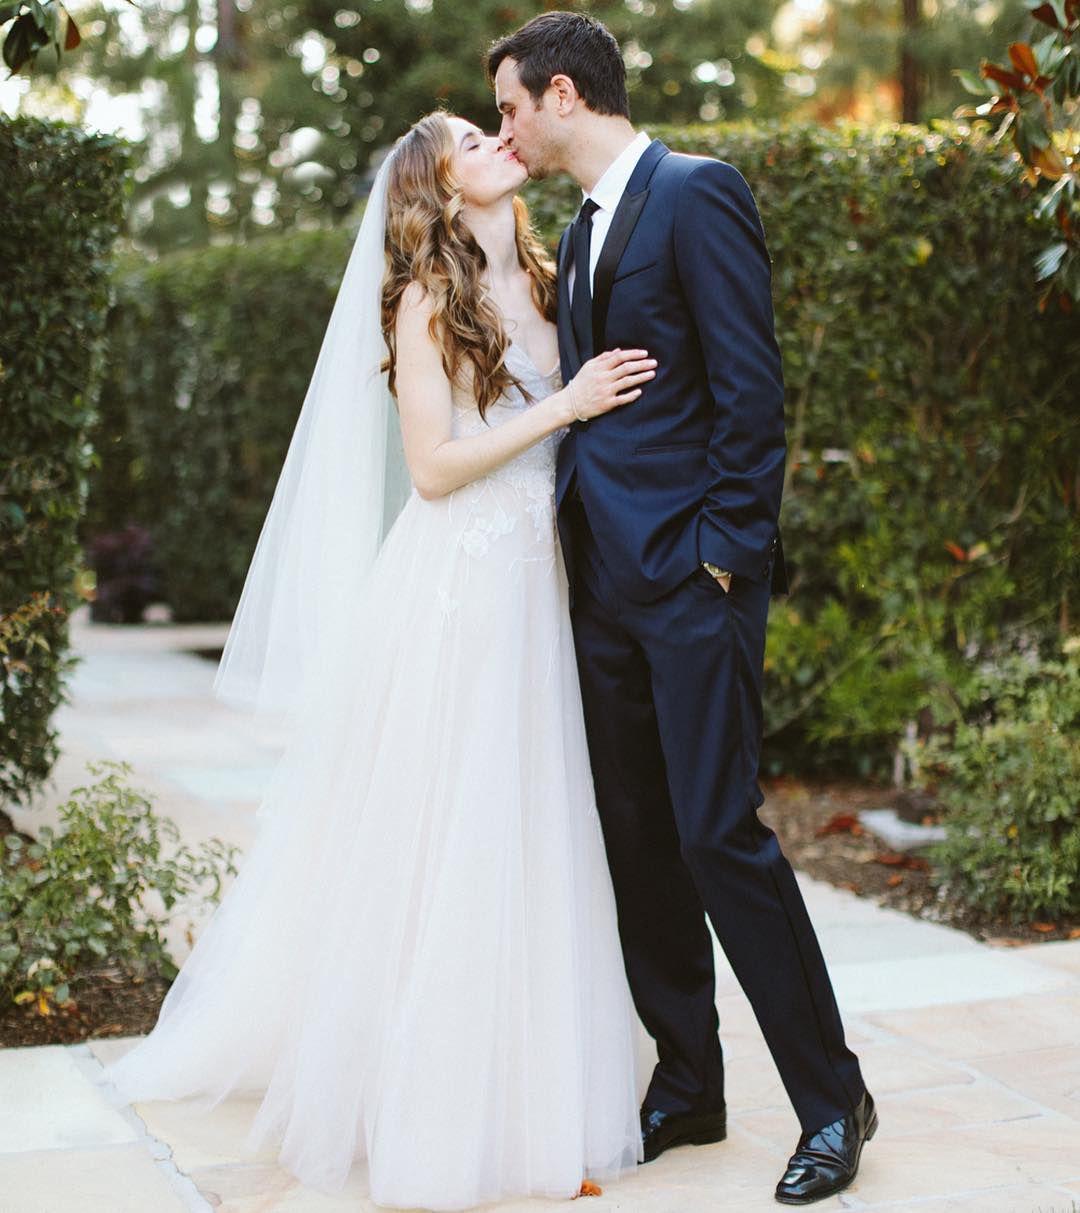 Danielle Panabaker and Hayes Robbins wedding day